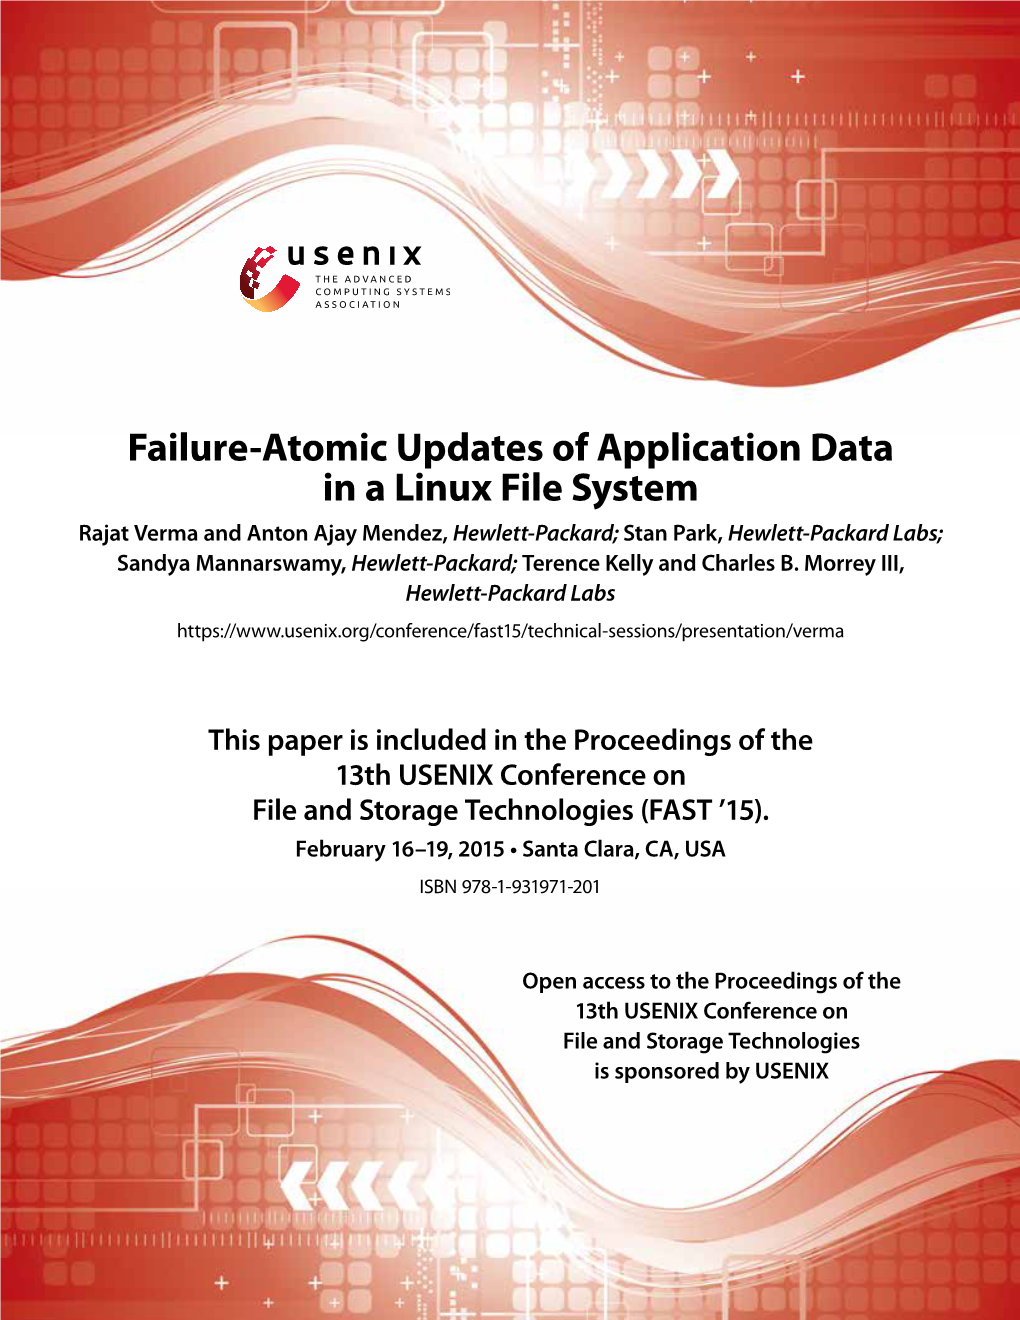 Failure-Atomic Updates of Application Data in a Linux File System